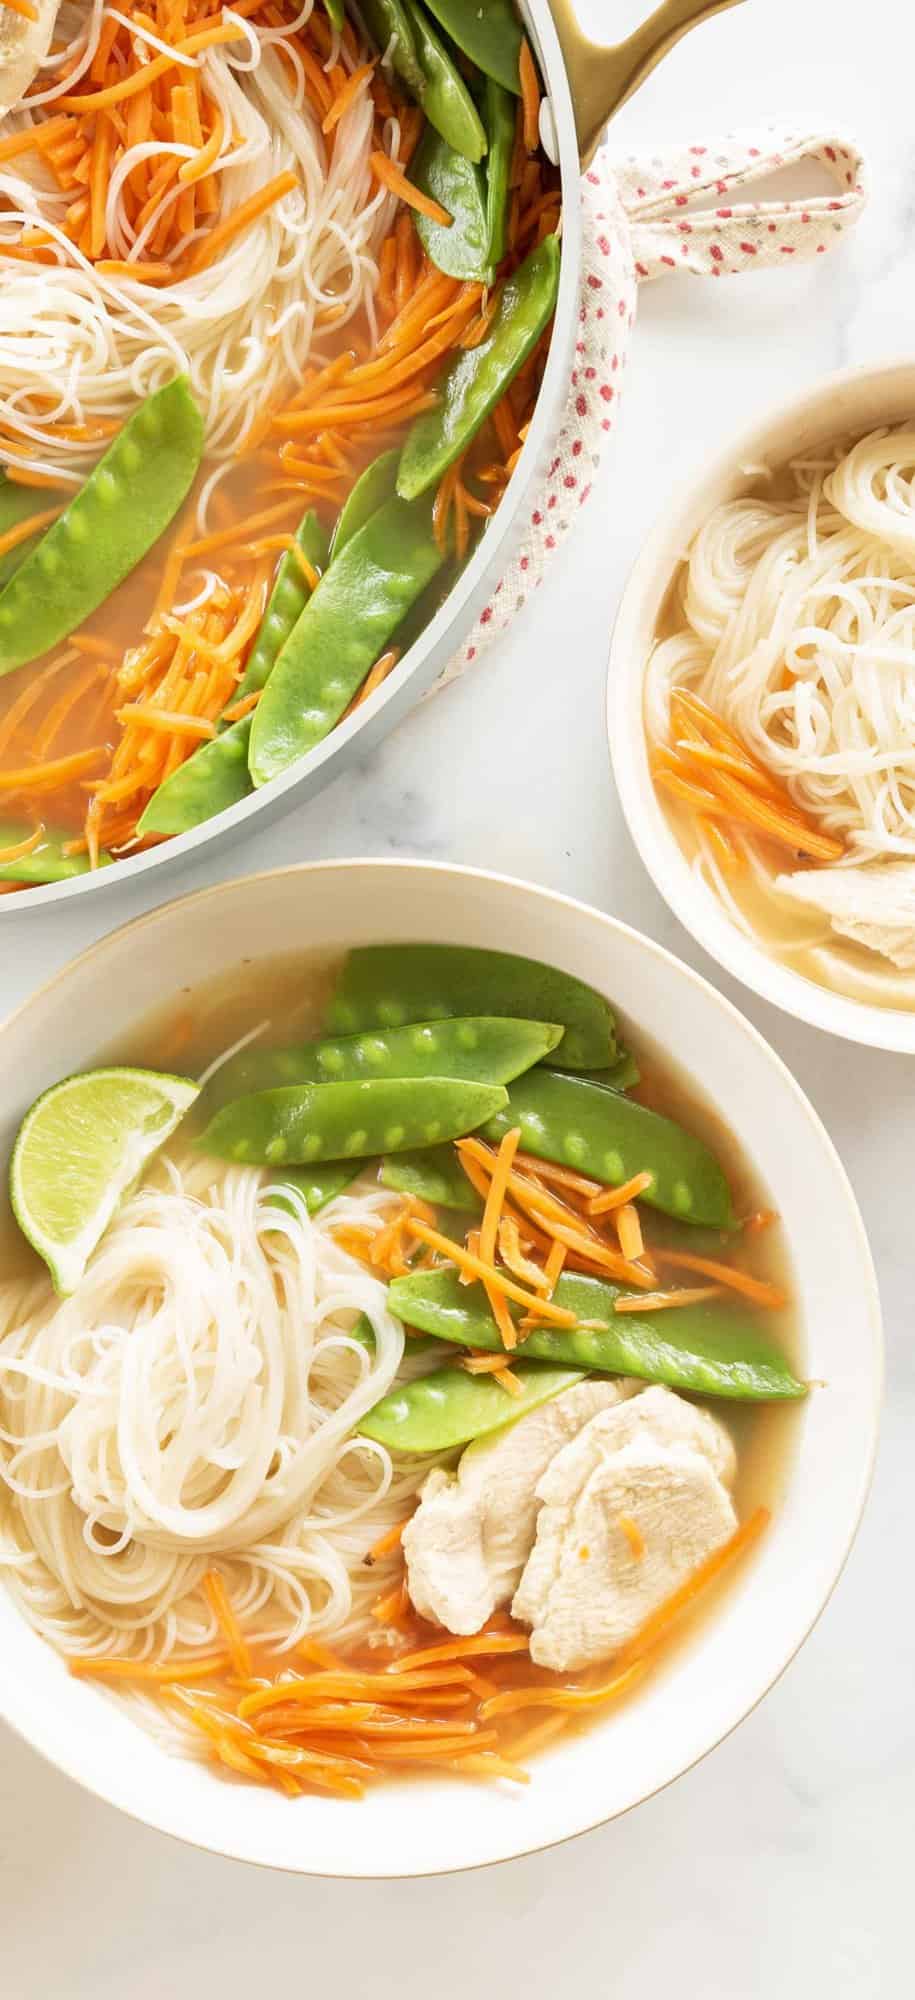 https://www.yummytoddlerfood.com/wp-content/uploads/2023/02/Rice-Noodle-Soup-6-vert-scaled.jpg